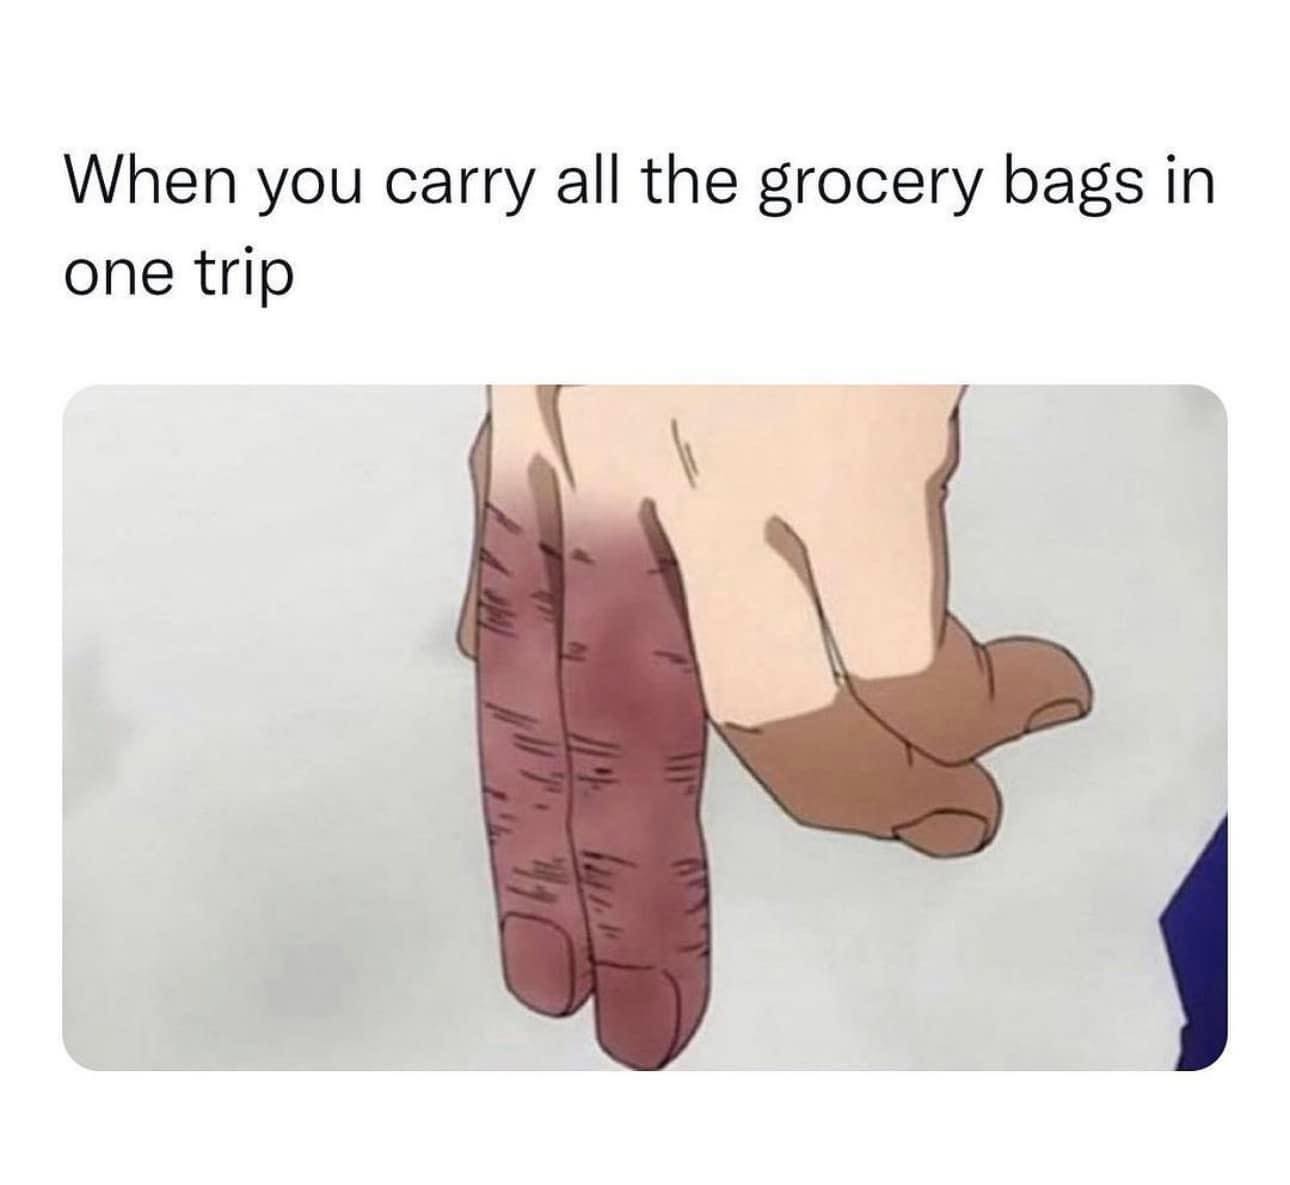 When you carry all the grocery bags in one trip.